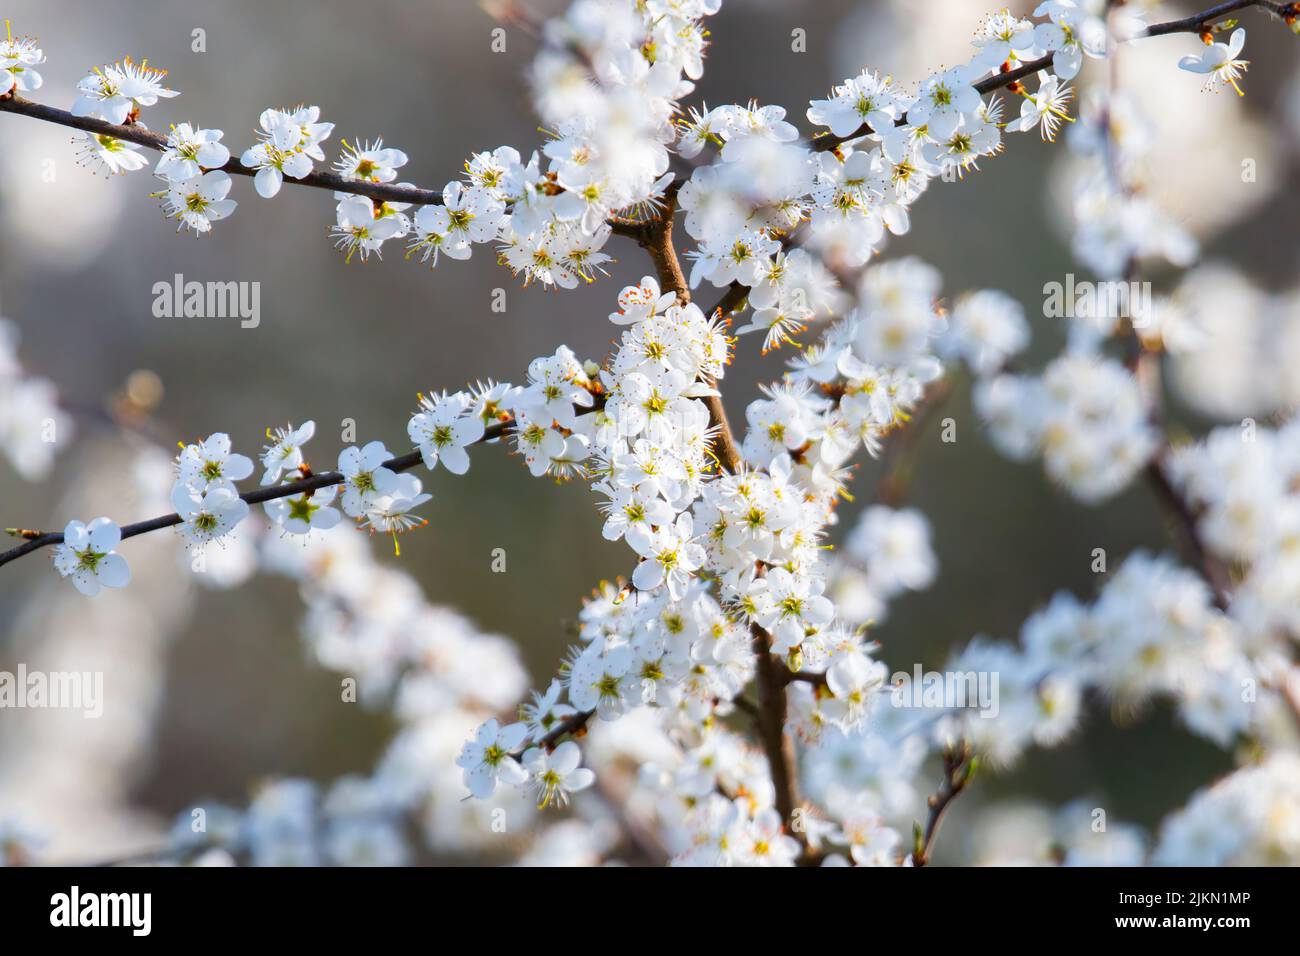 A closeup of fruit tree branches covered with lots of white flowers Stock Photo